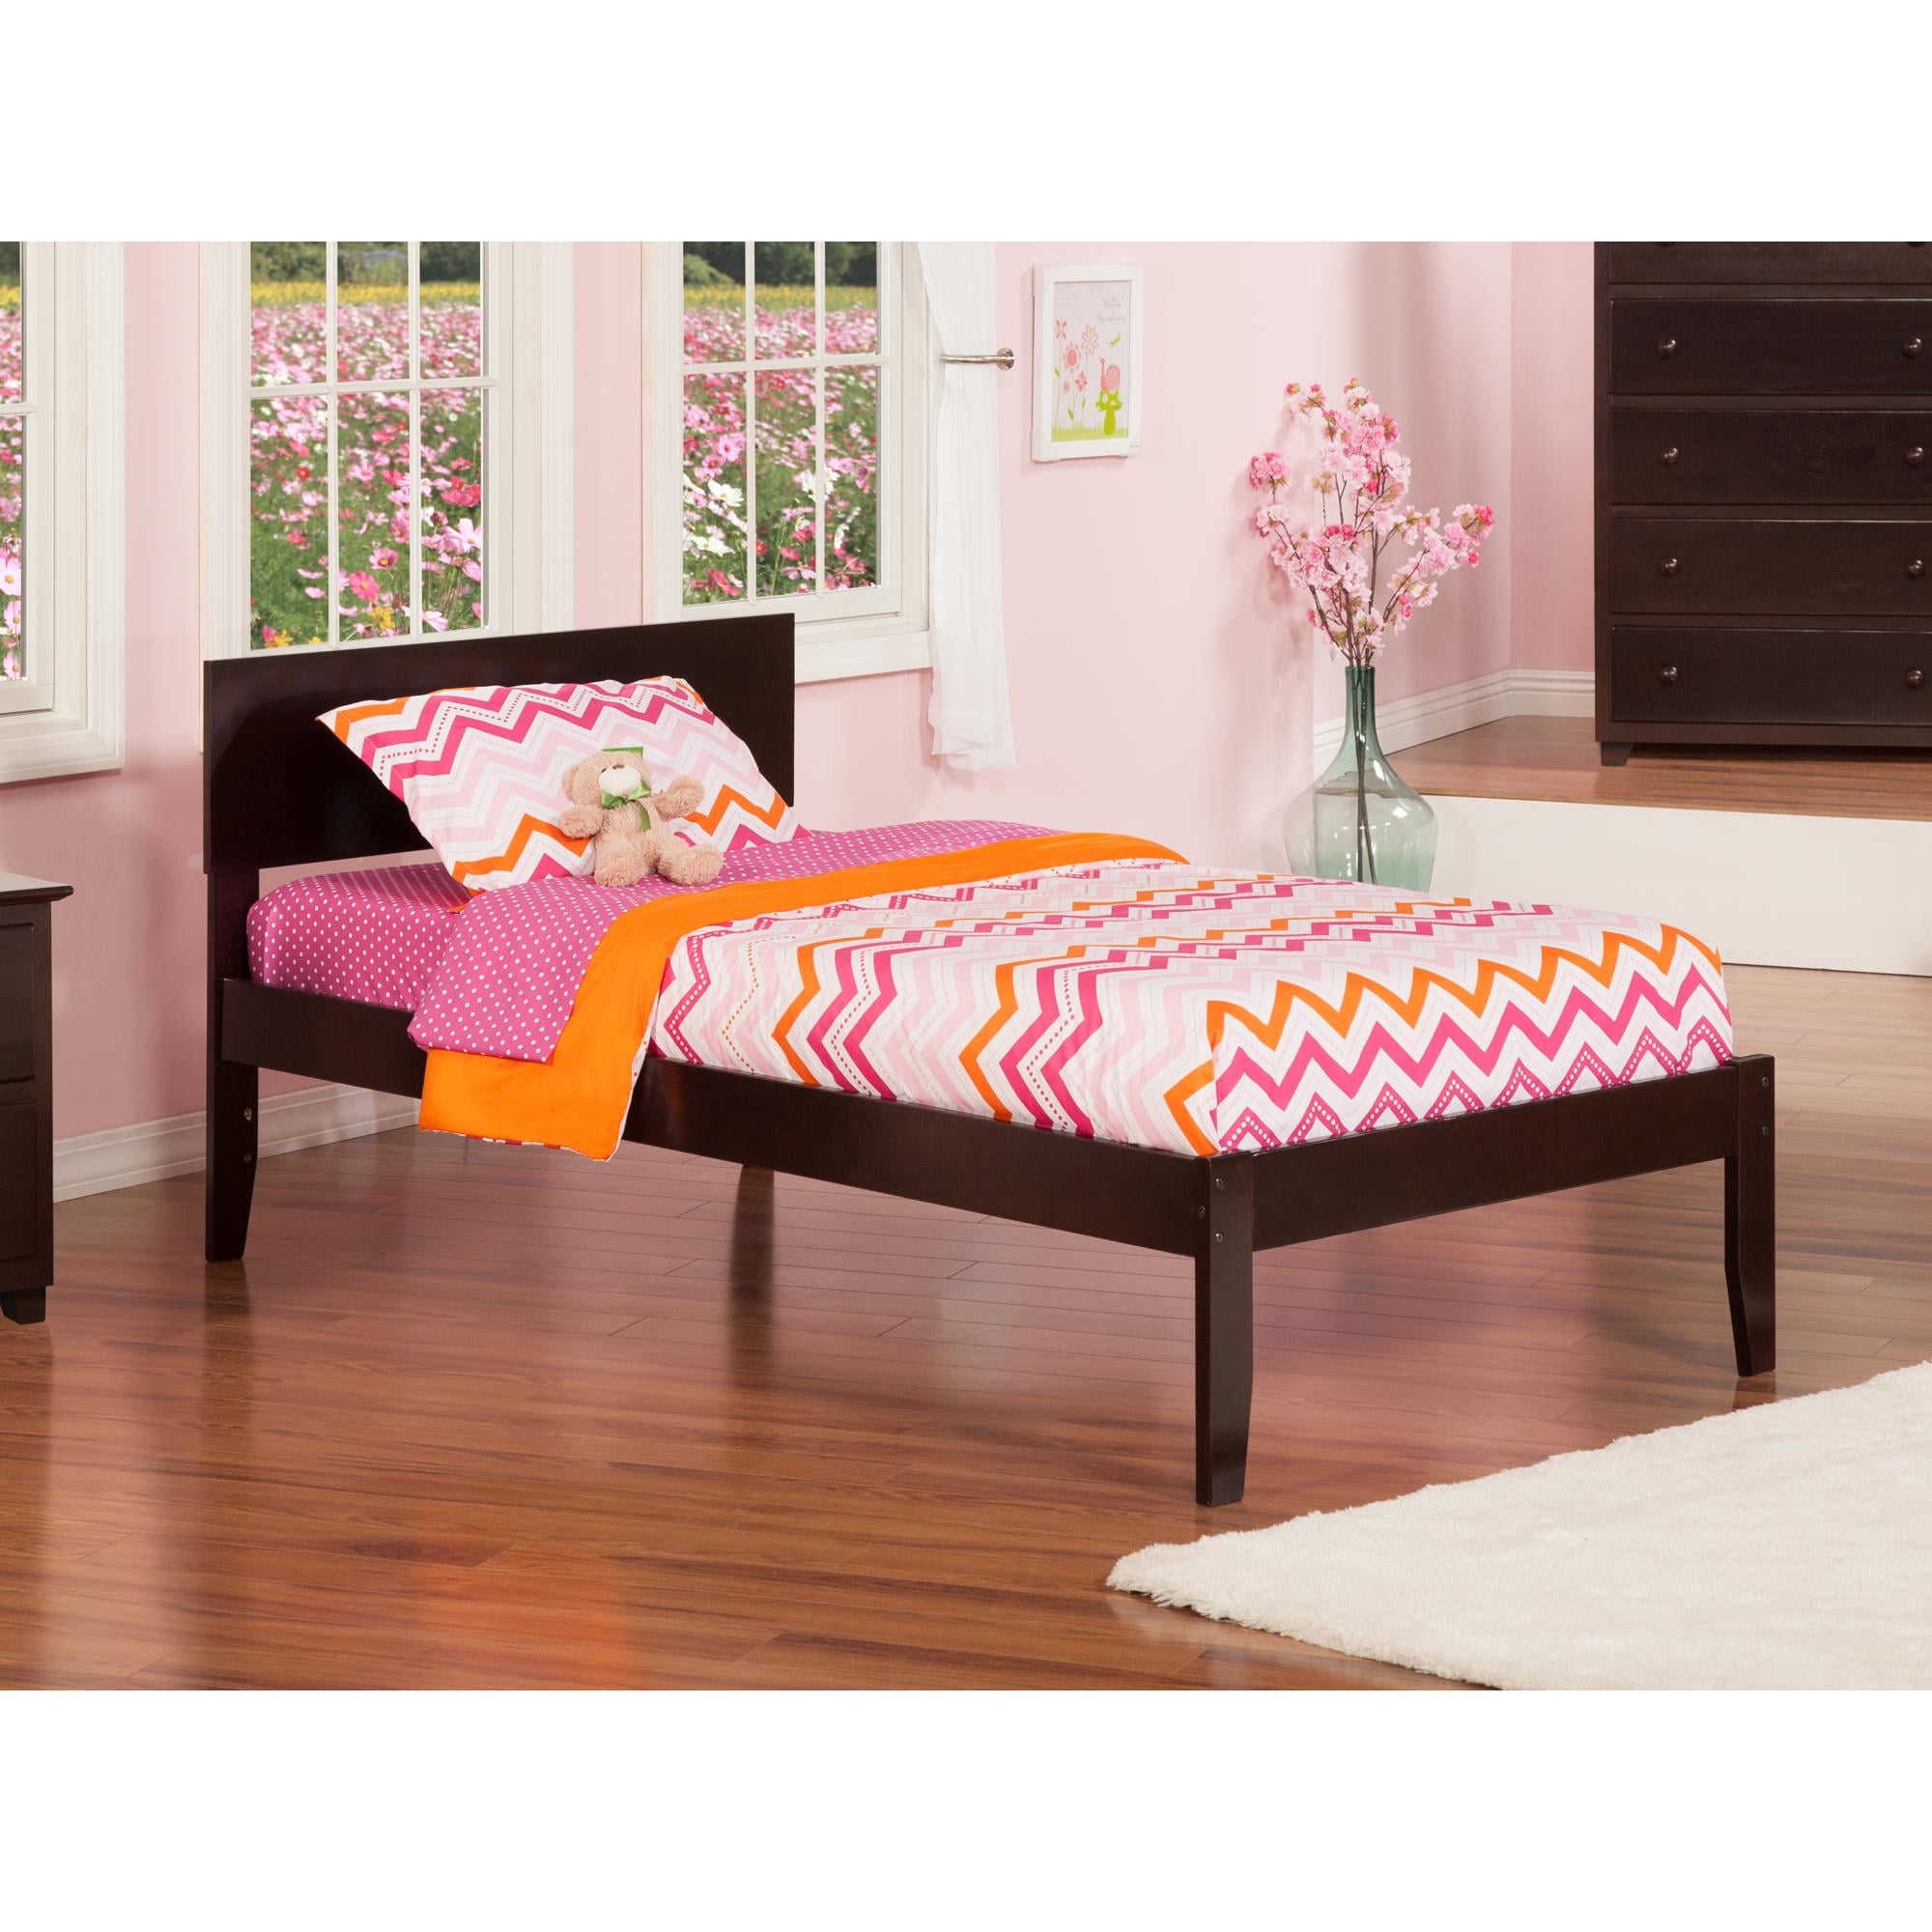 Orlando Twin Xl Platform Bed With Open, Extended Twin Bed